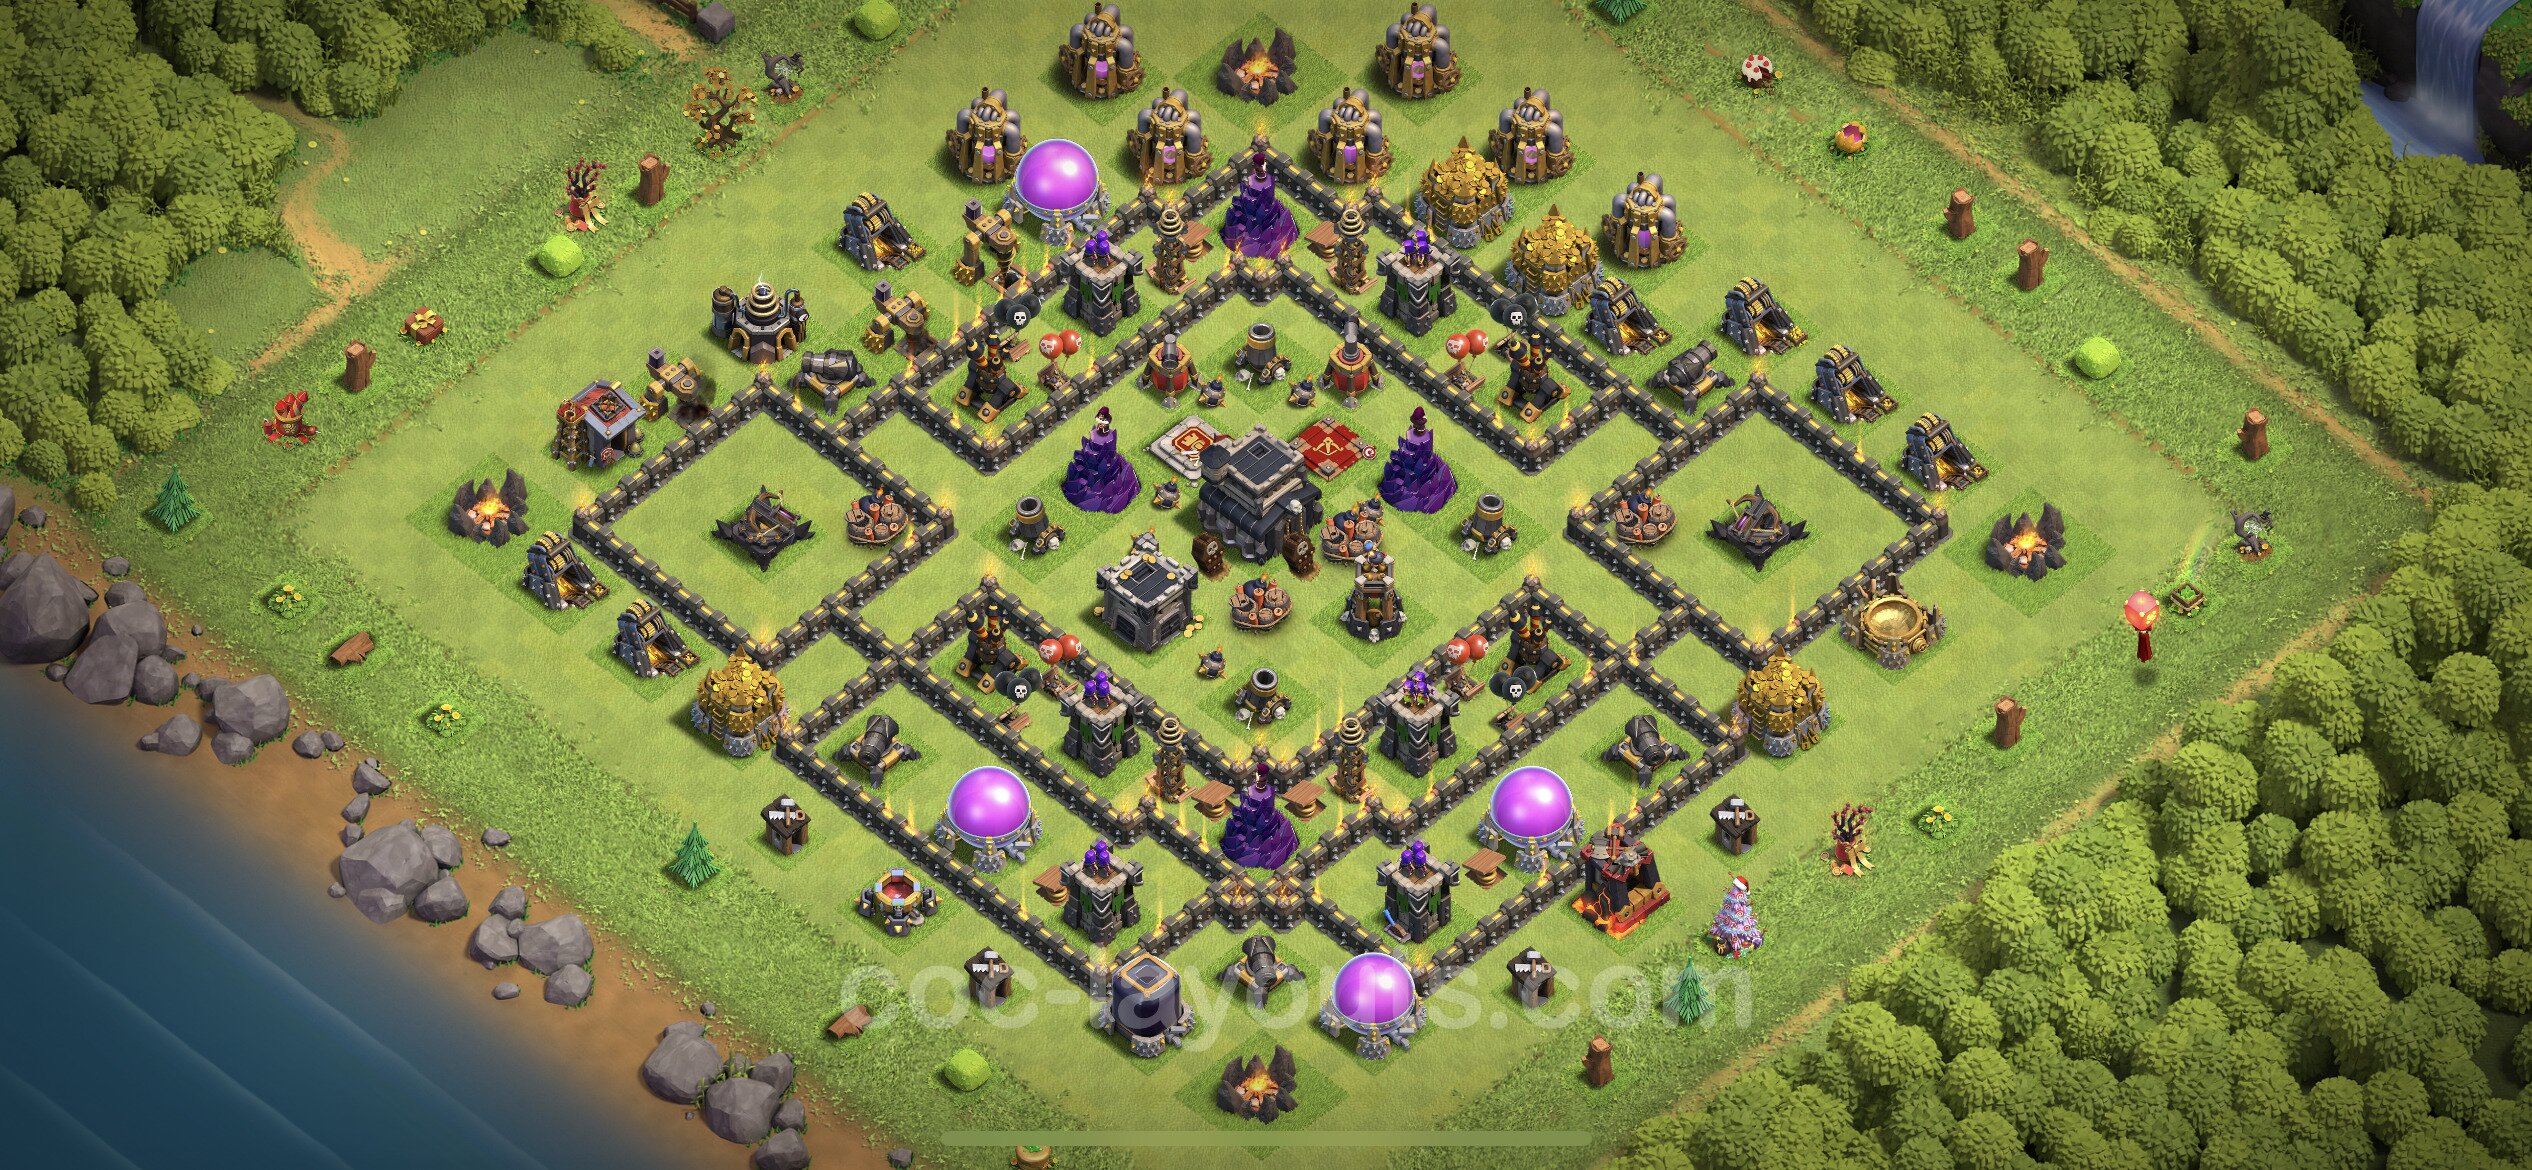 Unbeatable Base TH9 with Link, Anti Everything - best plan / Anti Loot / de...